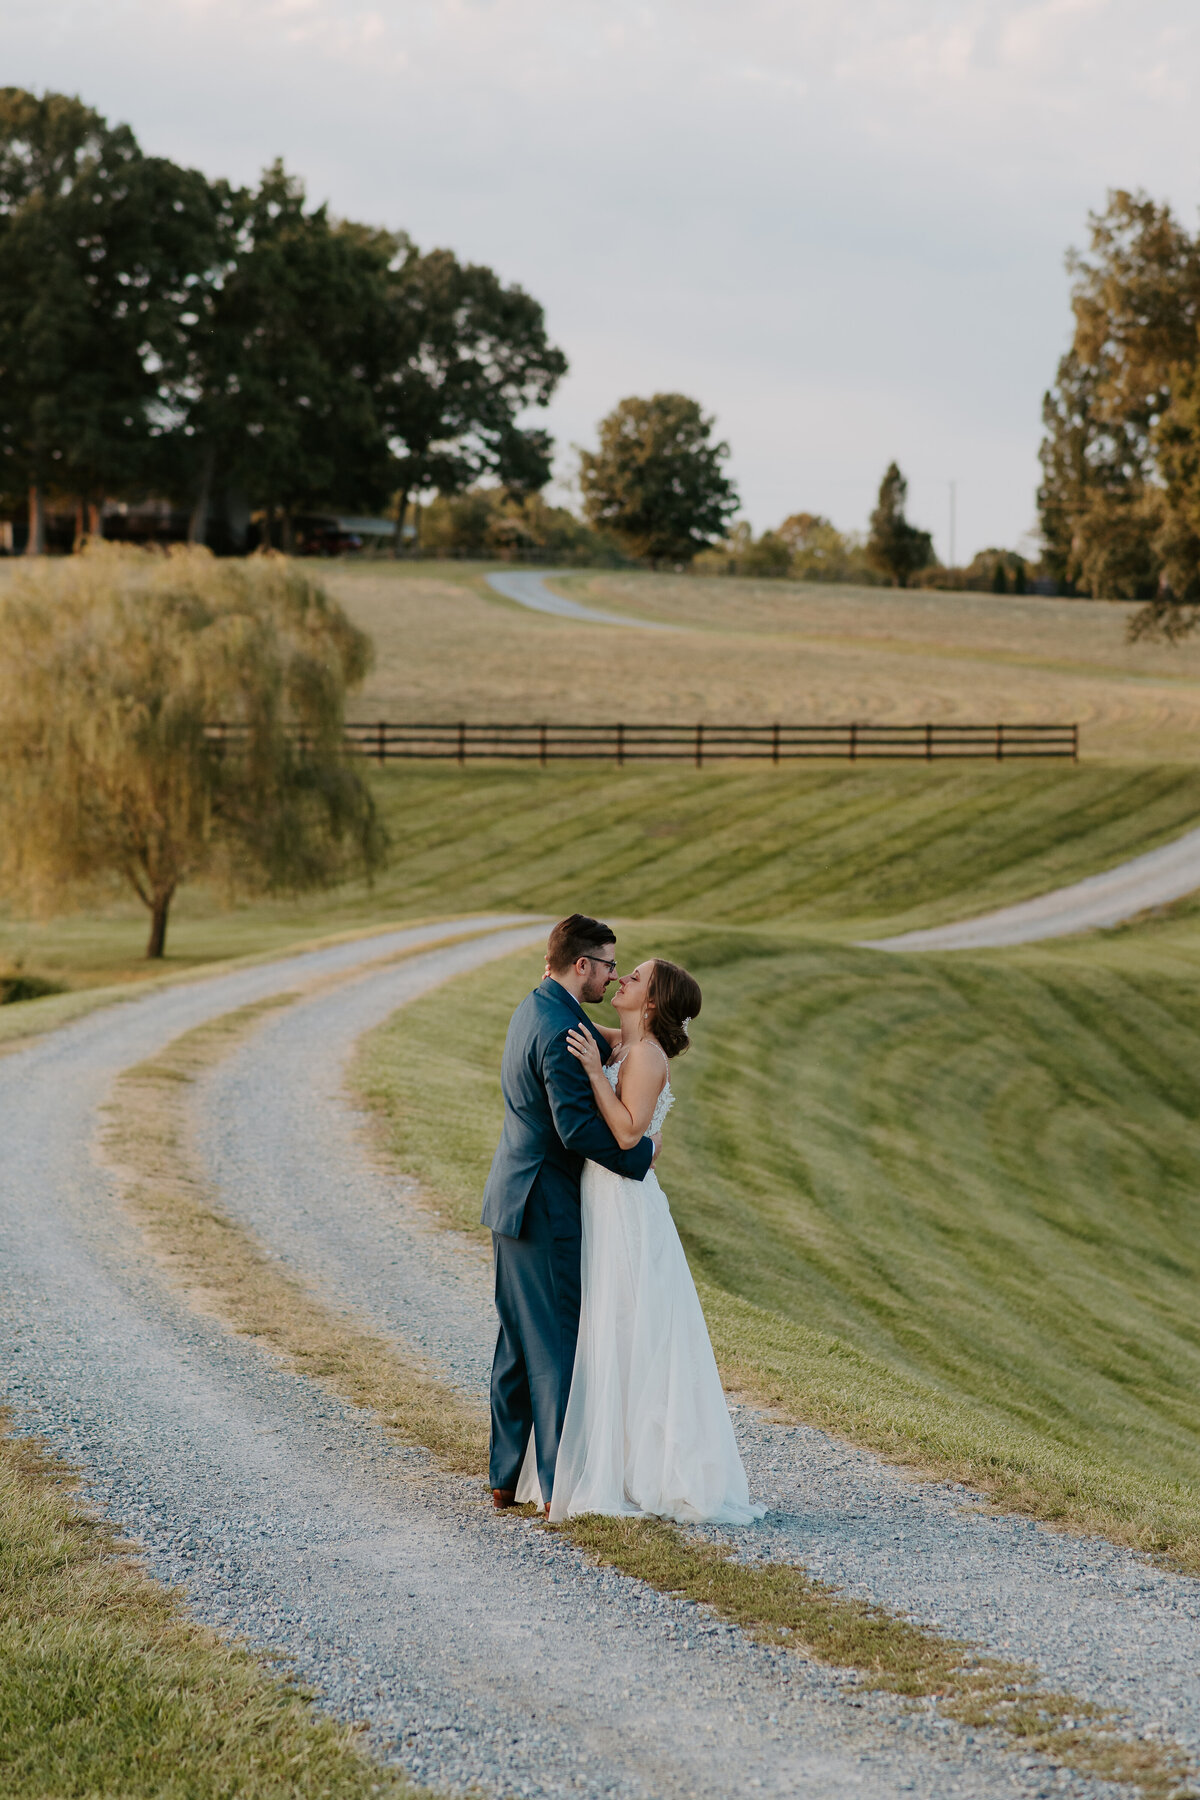 Open field golden hour portraits with the bride and groom, winding road leading down to the couple in the hills of Bedford, Virginia.